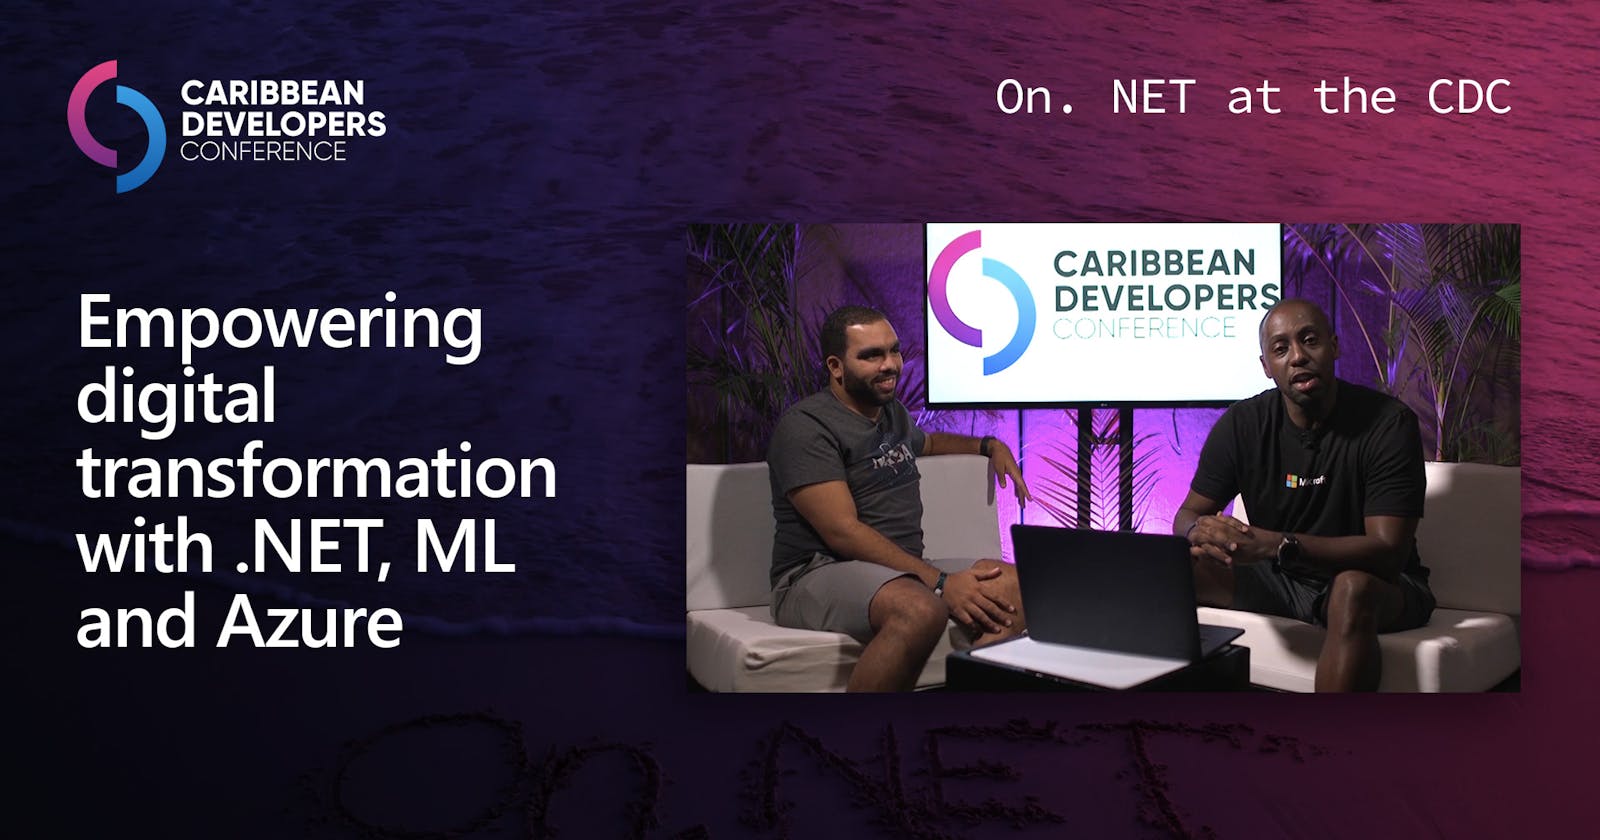 On .NET Episode: Empowering digital transformation with .NET, ML and Azure